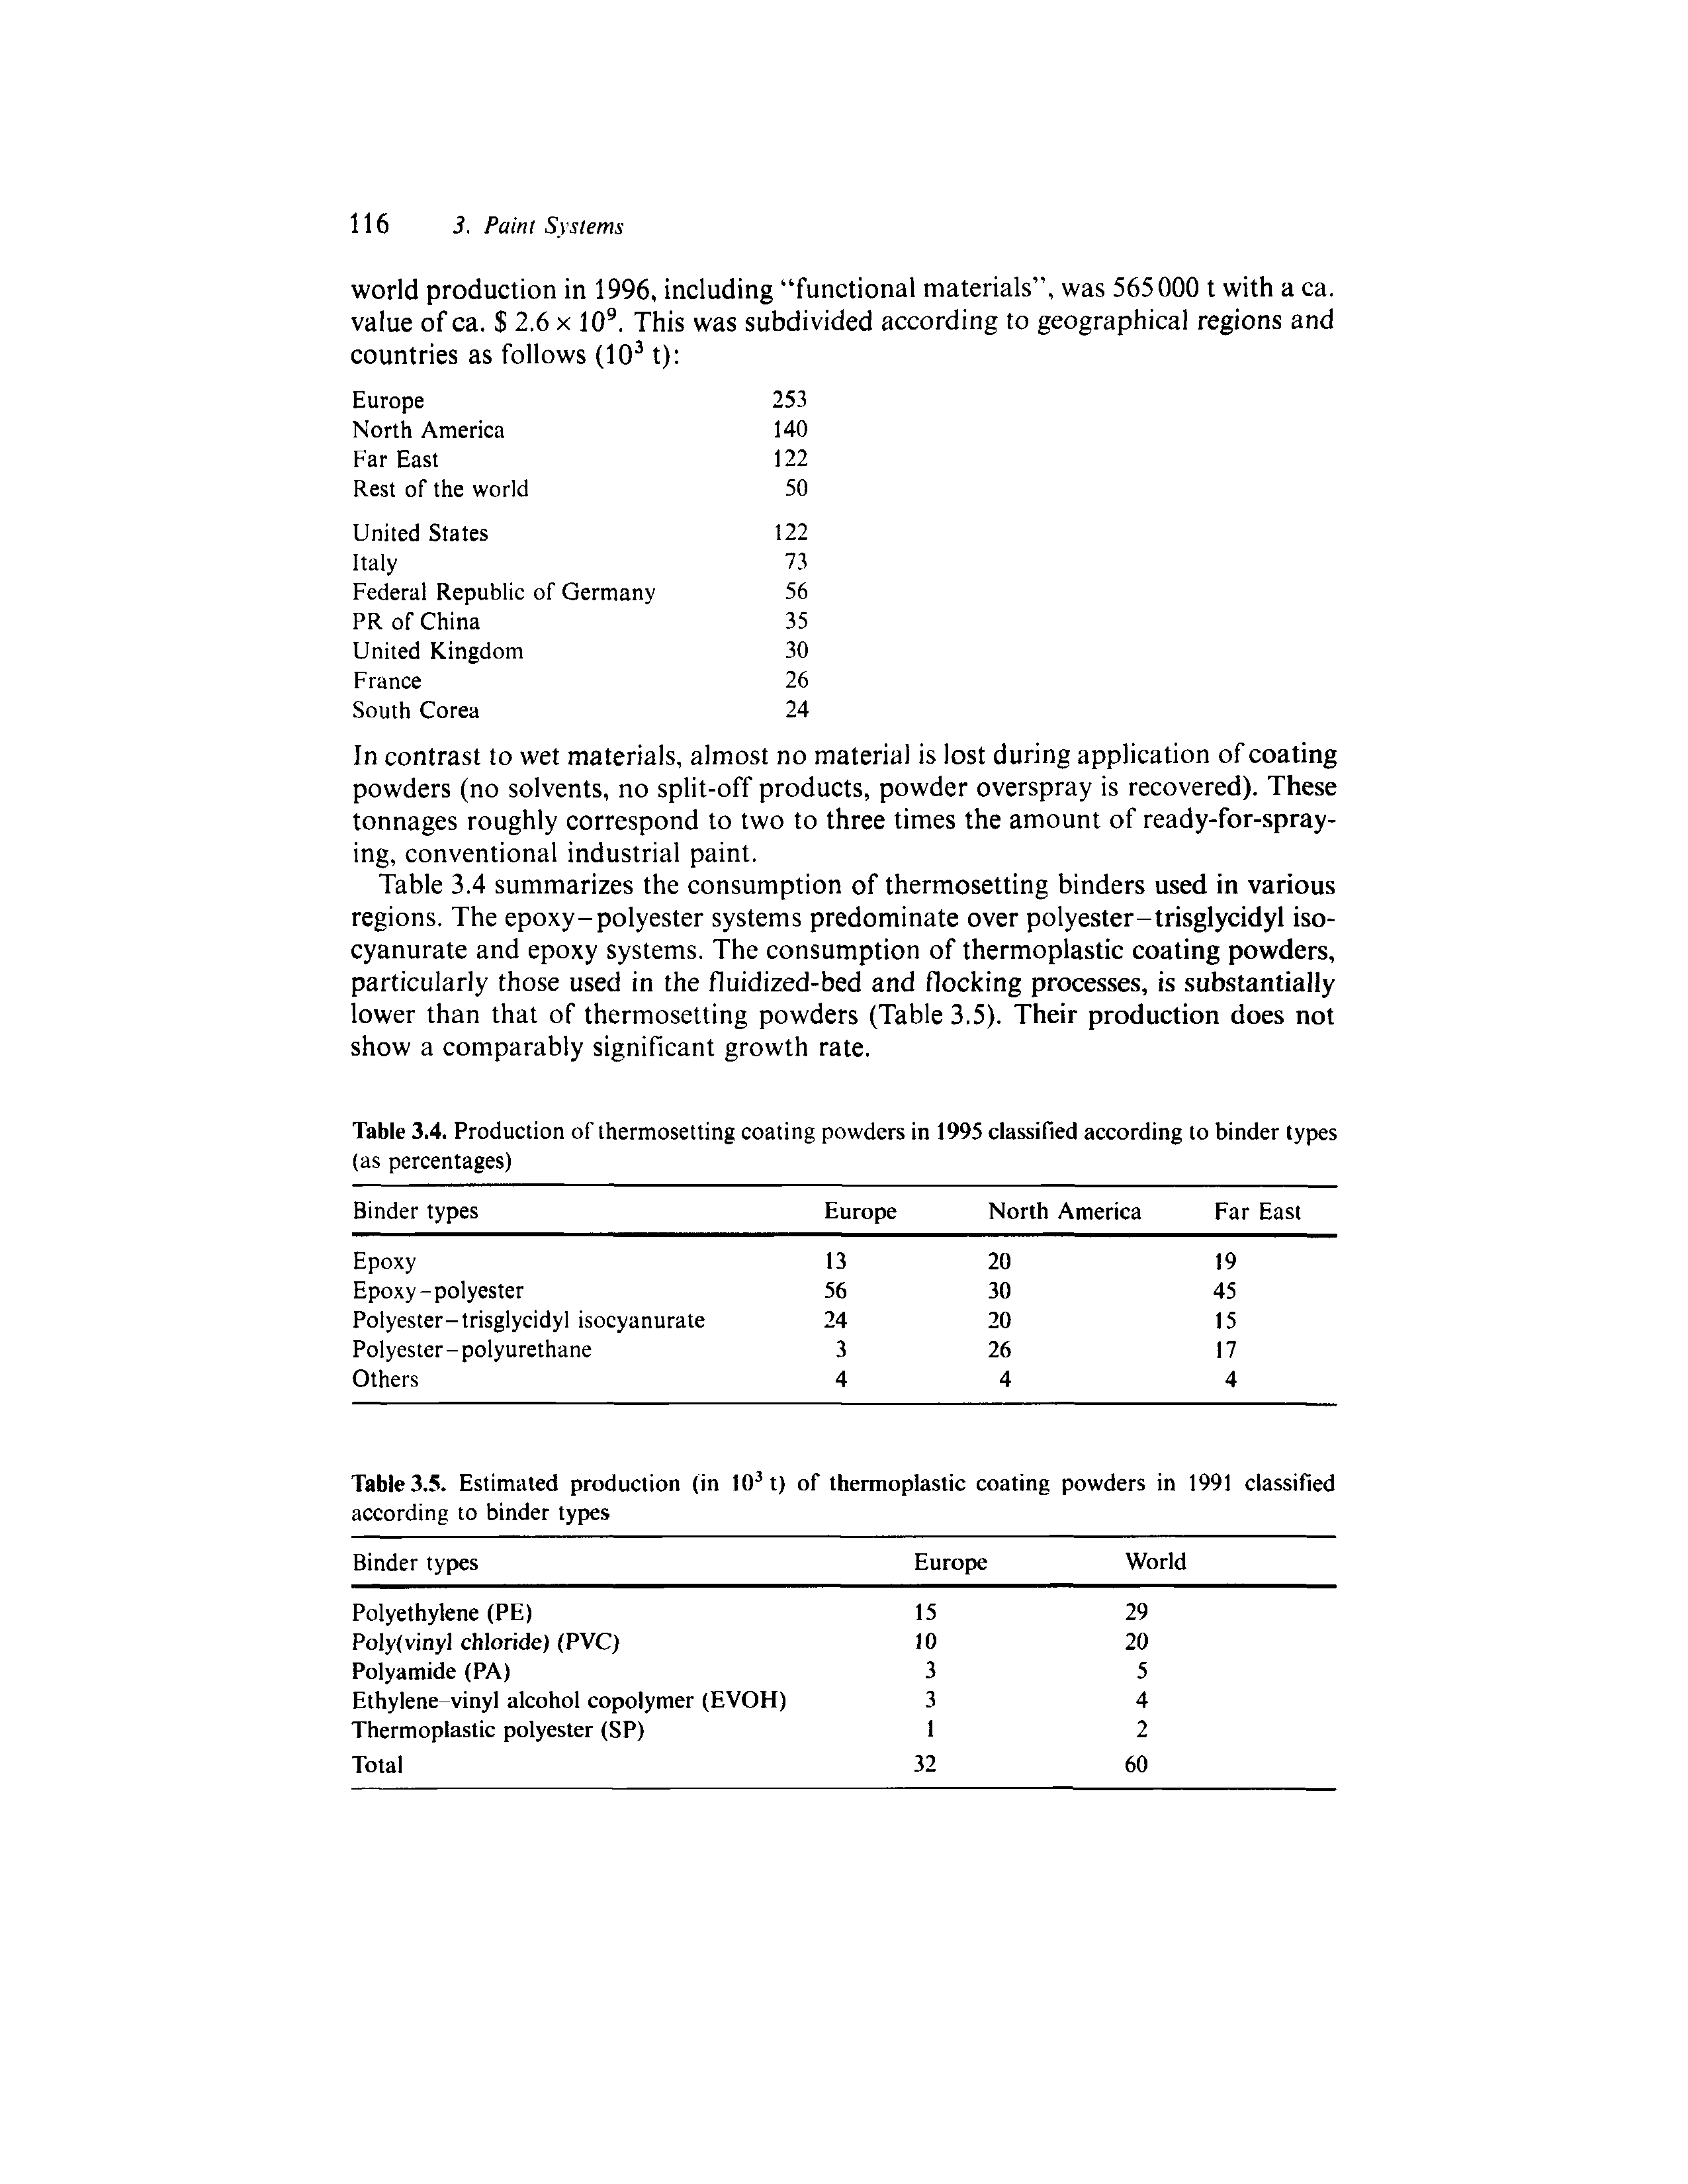 Table 3.4 summarizes the consumption of thermosetting binders used in various regions. The epoxy-polyester systems predominate over polyester-trisglycidyl iso-cyanurate and epoxy systems. The consumption of thermoplastic coating powders, particularly those used in the fluidized-bed and flocking processes, is substantially lower than that of thermosetting powders (Table 3.5). Their production does not show a comparably significant growth rate.